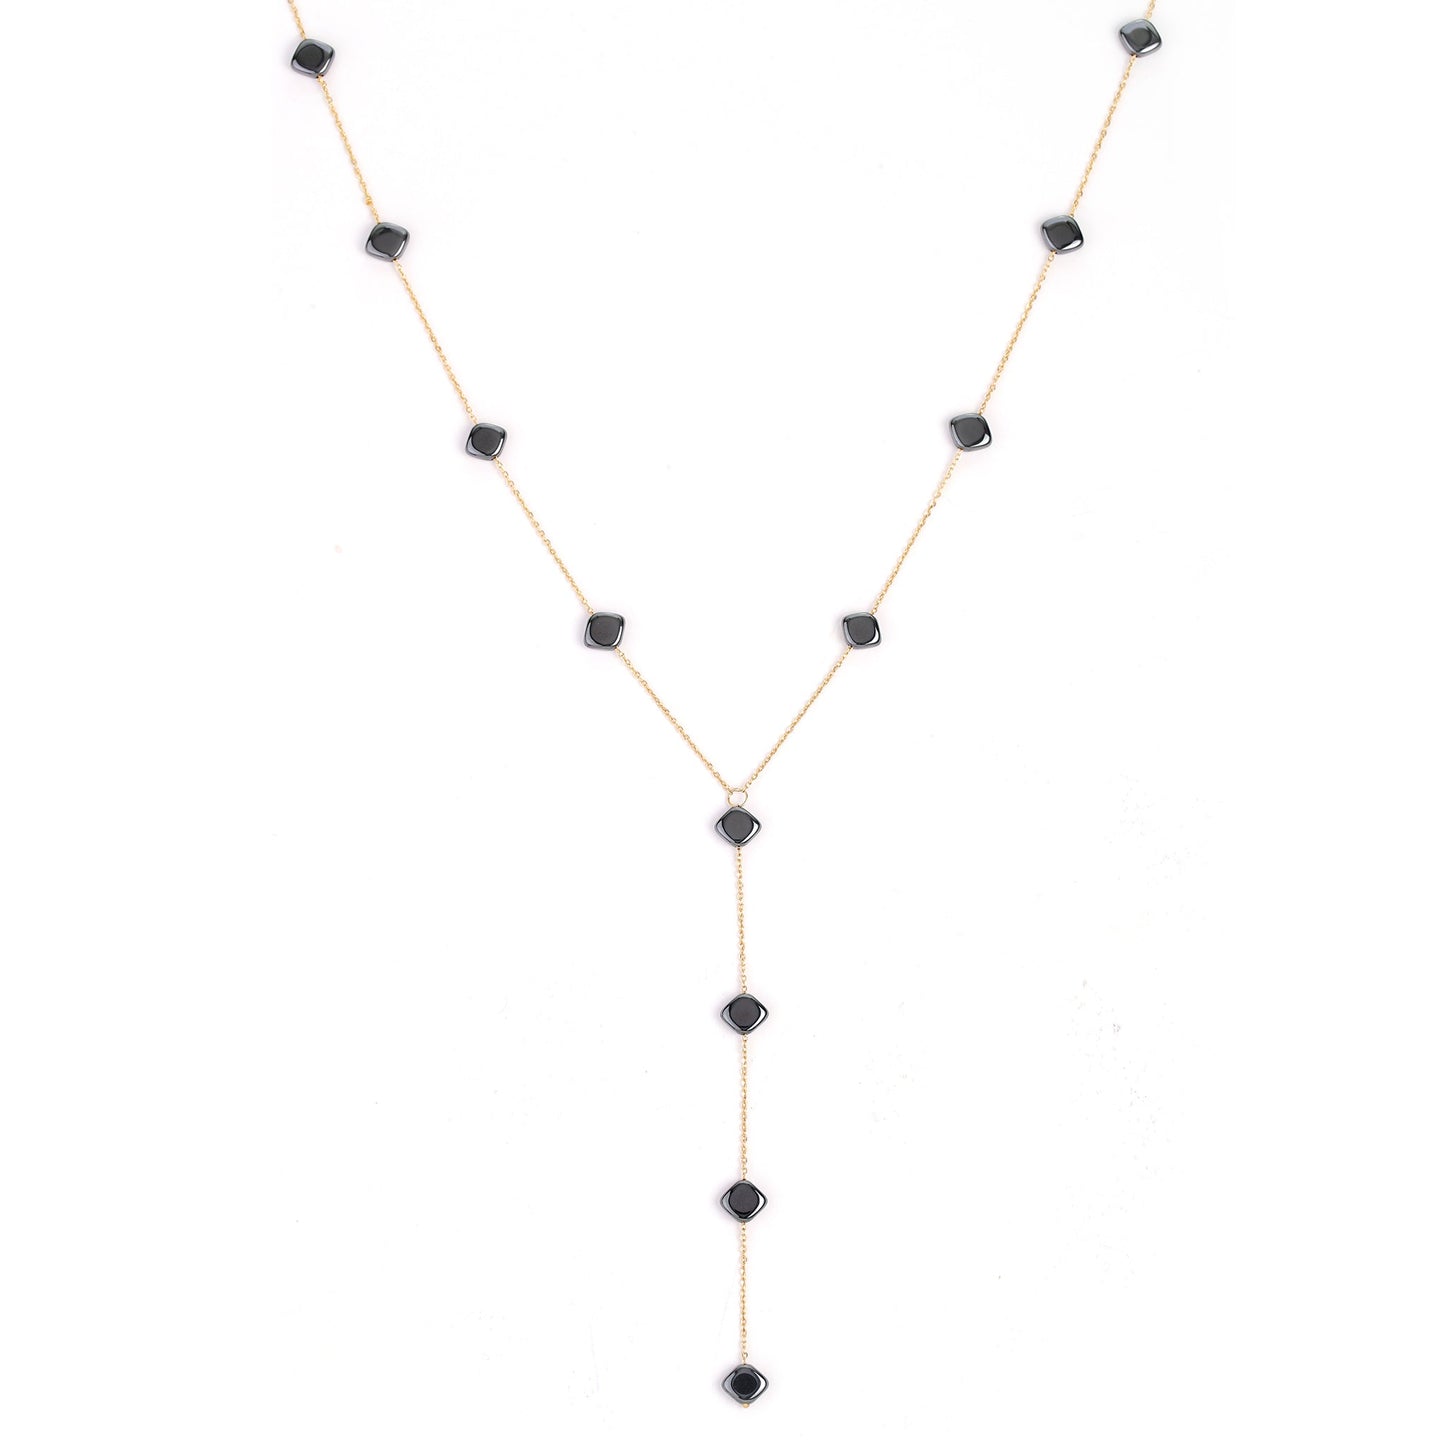 The Connected necklace diamond shape - Oria.jewelry